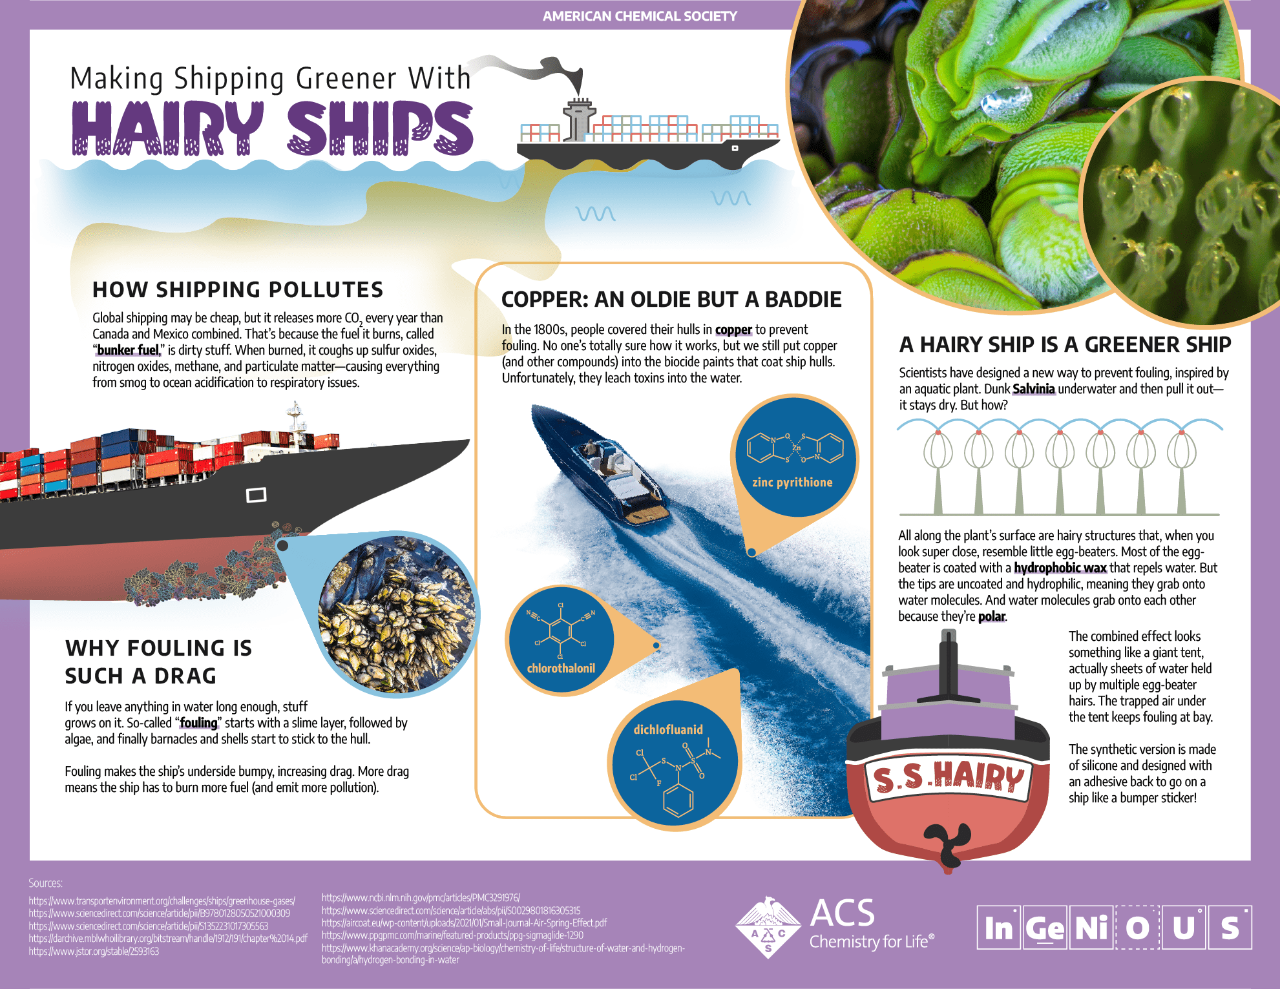 Making Shipping Greener with Hairy Ships: Infographic